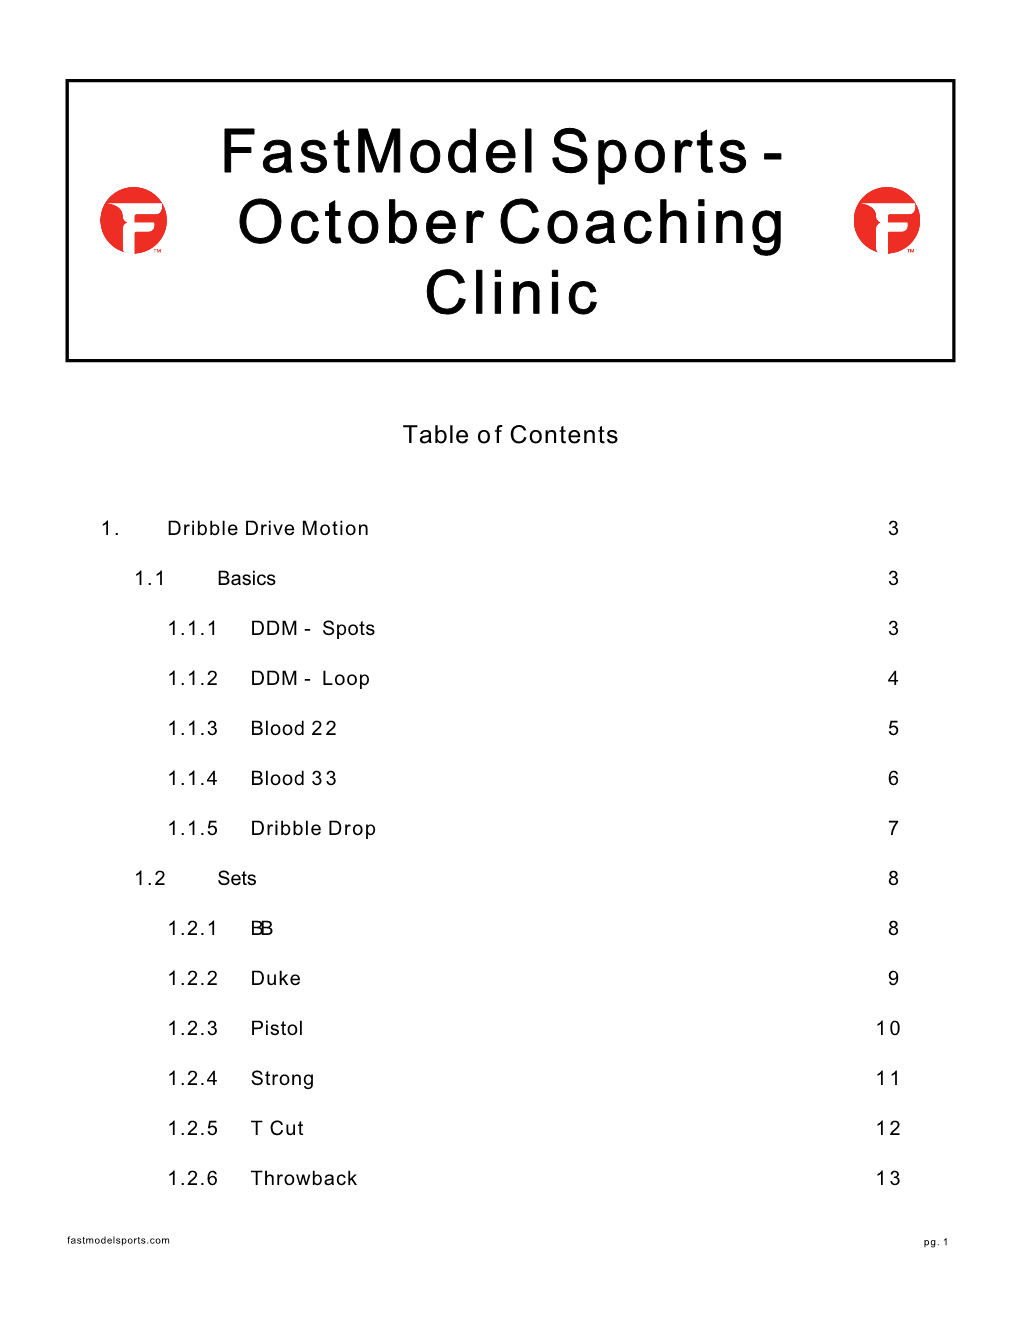 Fastmodel Sports - October Coaching Clinic